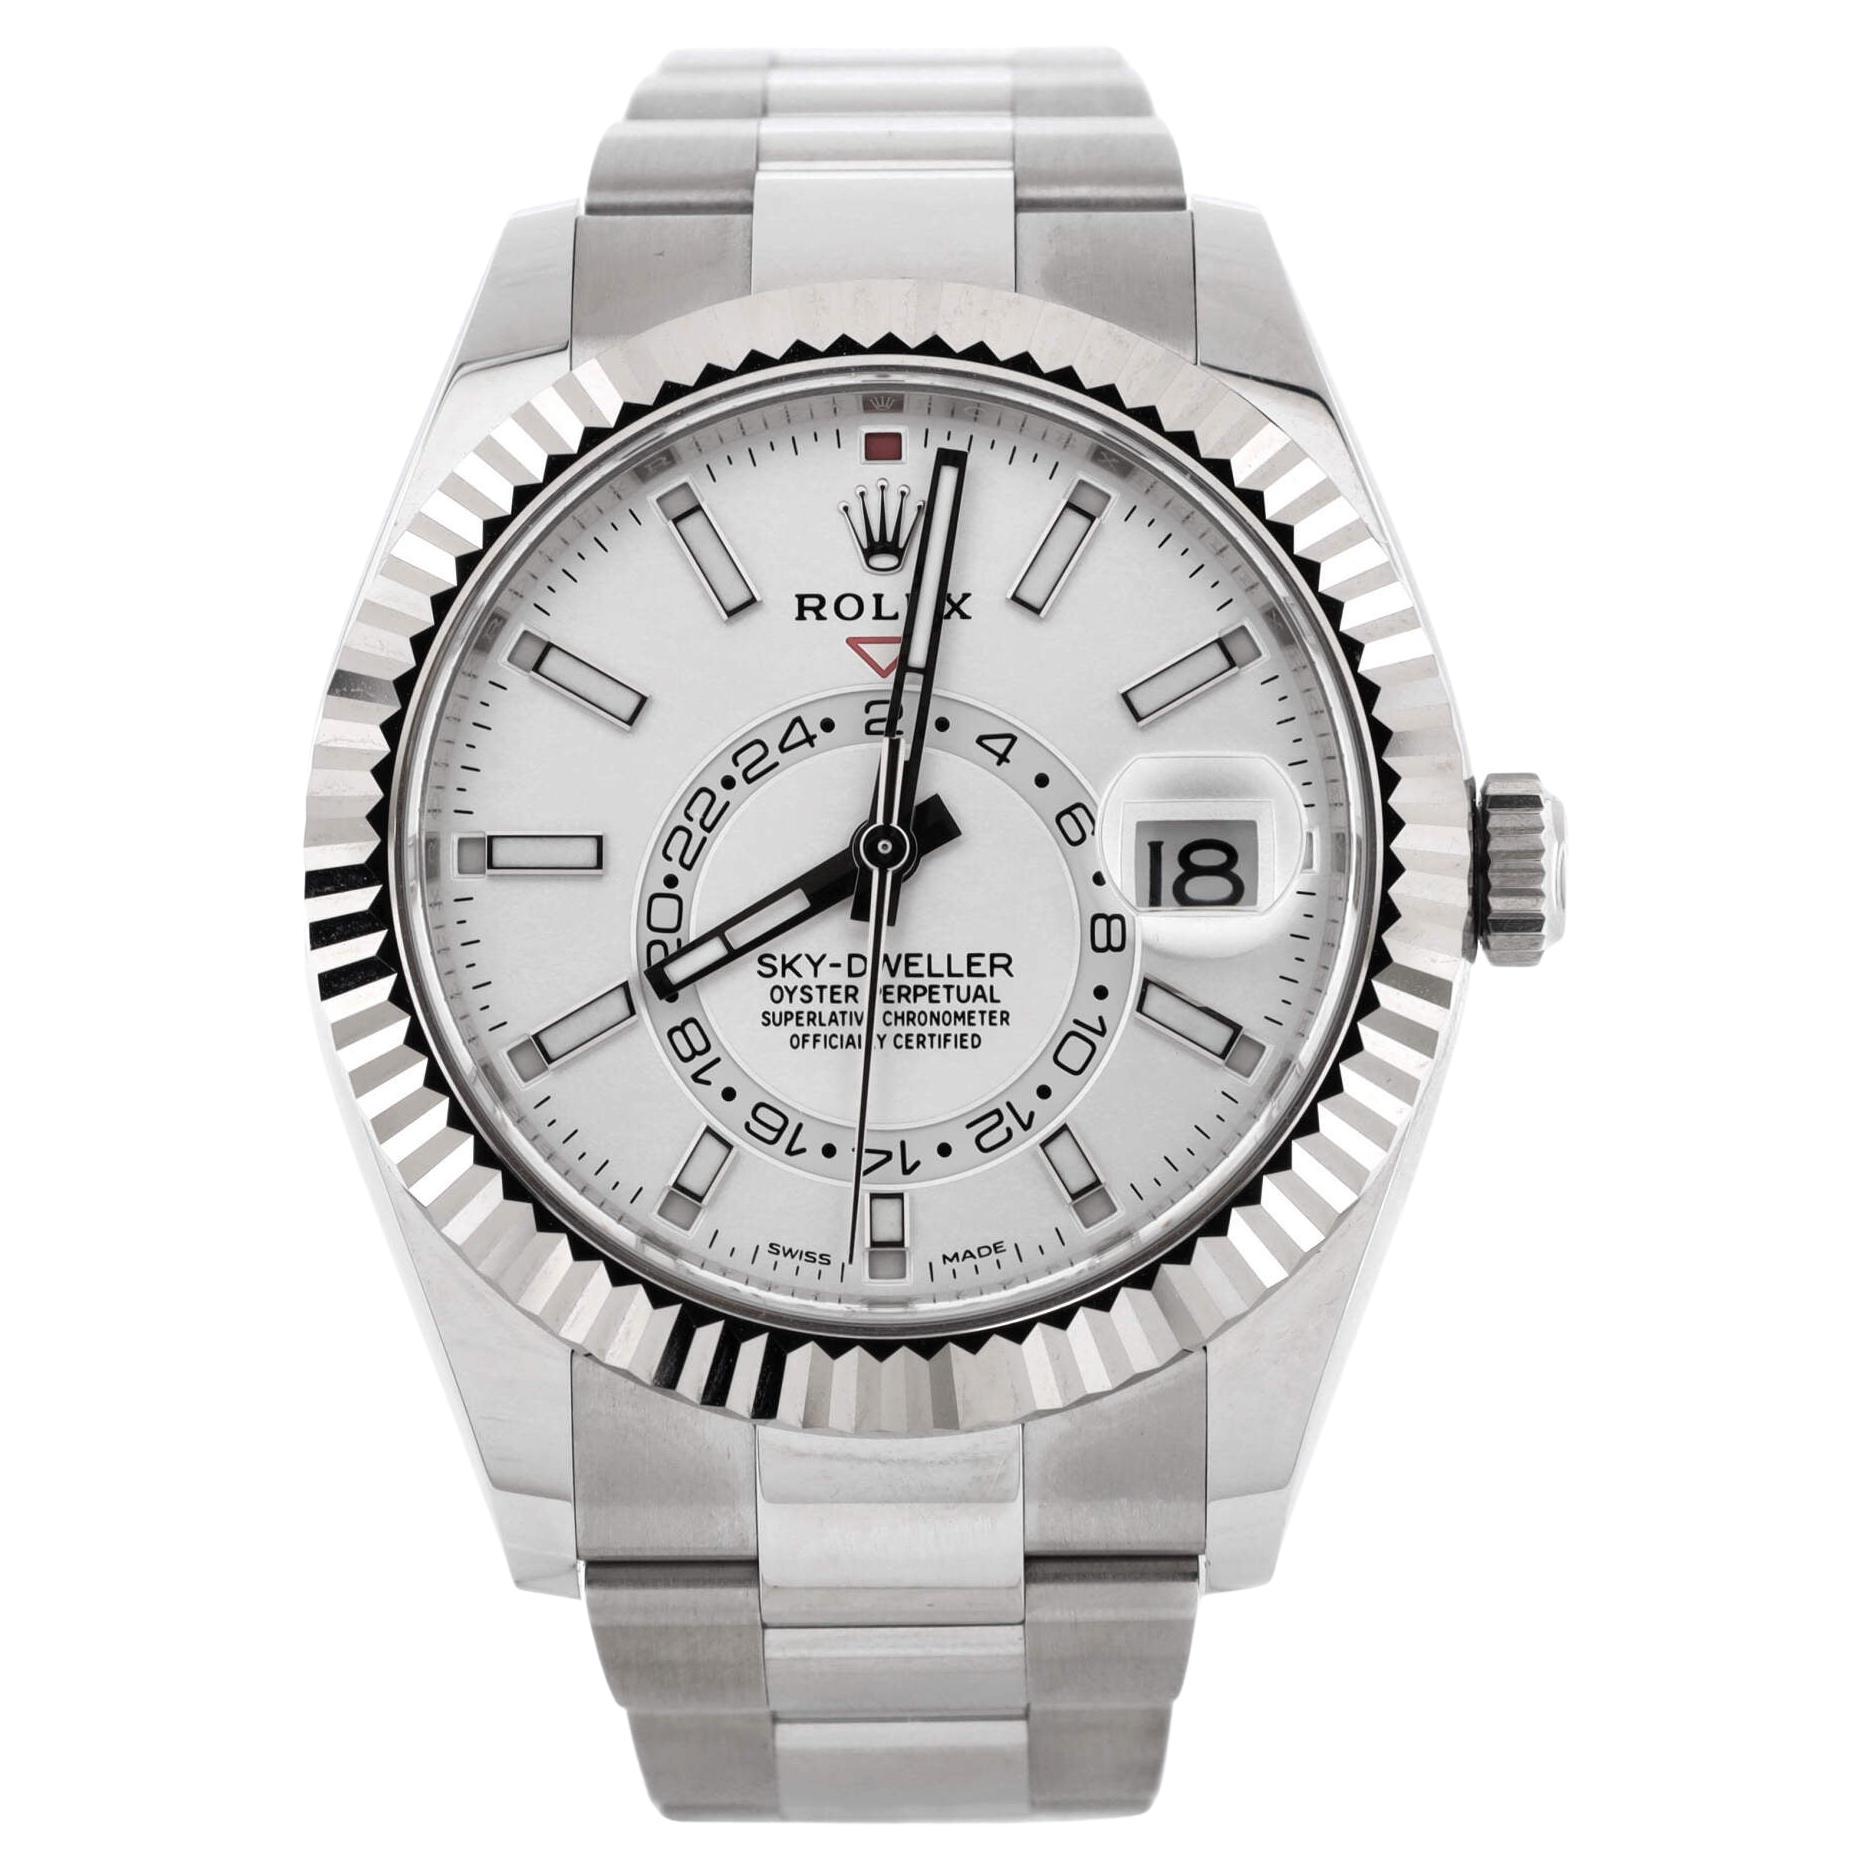 Rolex Sky-Dweller Oyster Perpetual Chronometer White Automatic Watch Stai For Sale